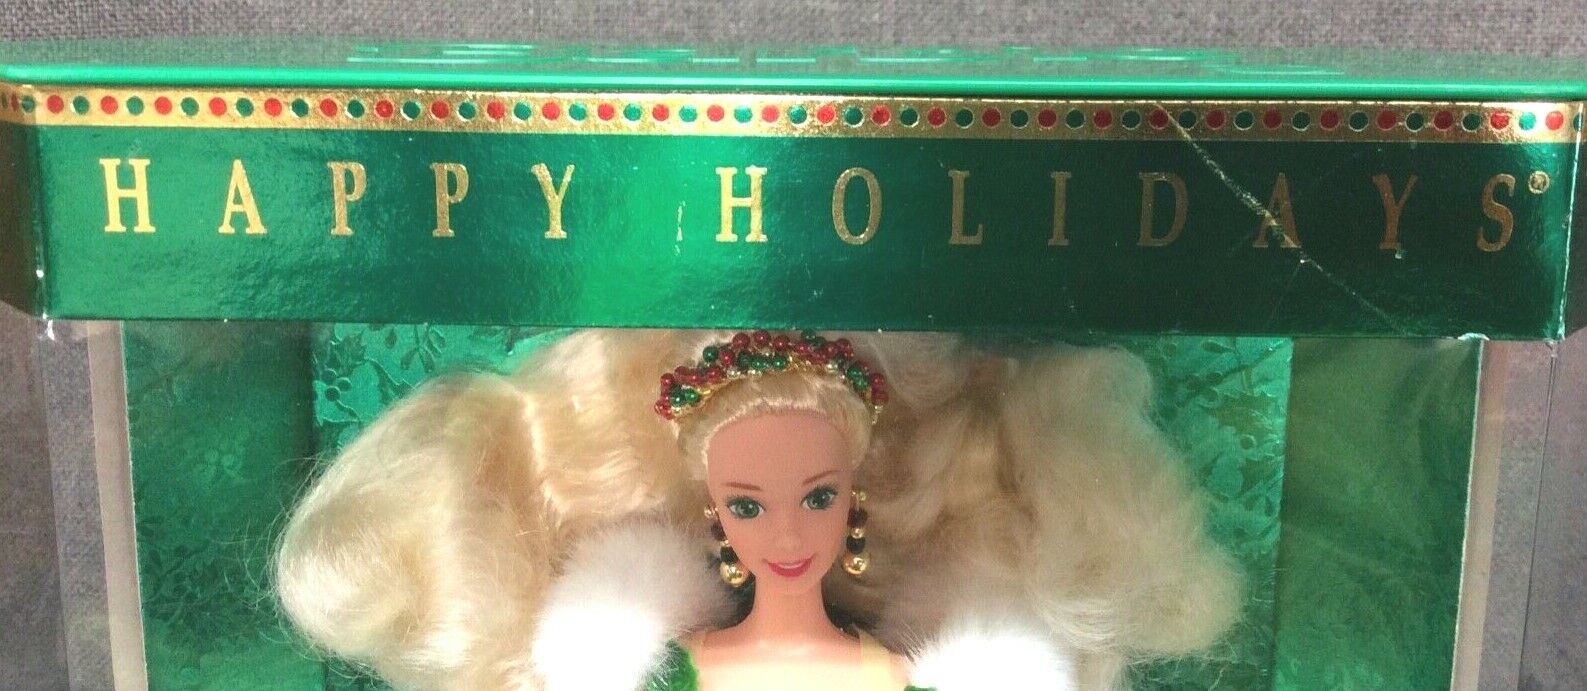 Happy Holidays 1994 Barbie Doll for sale online 